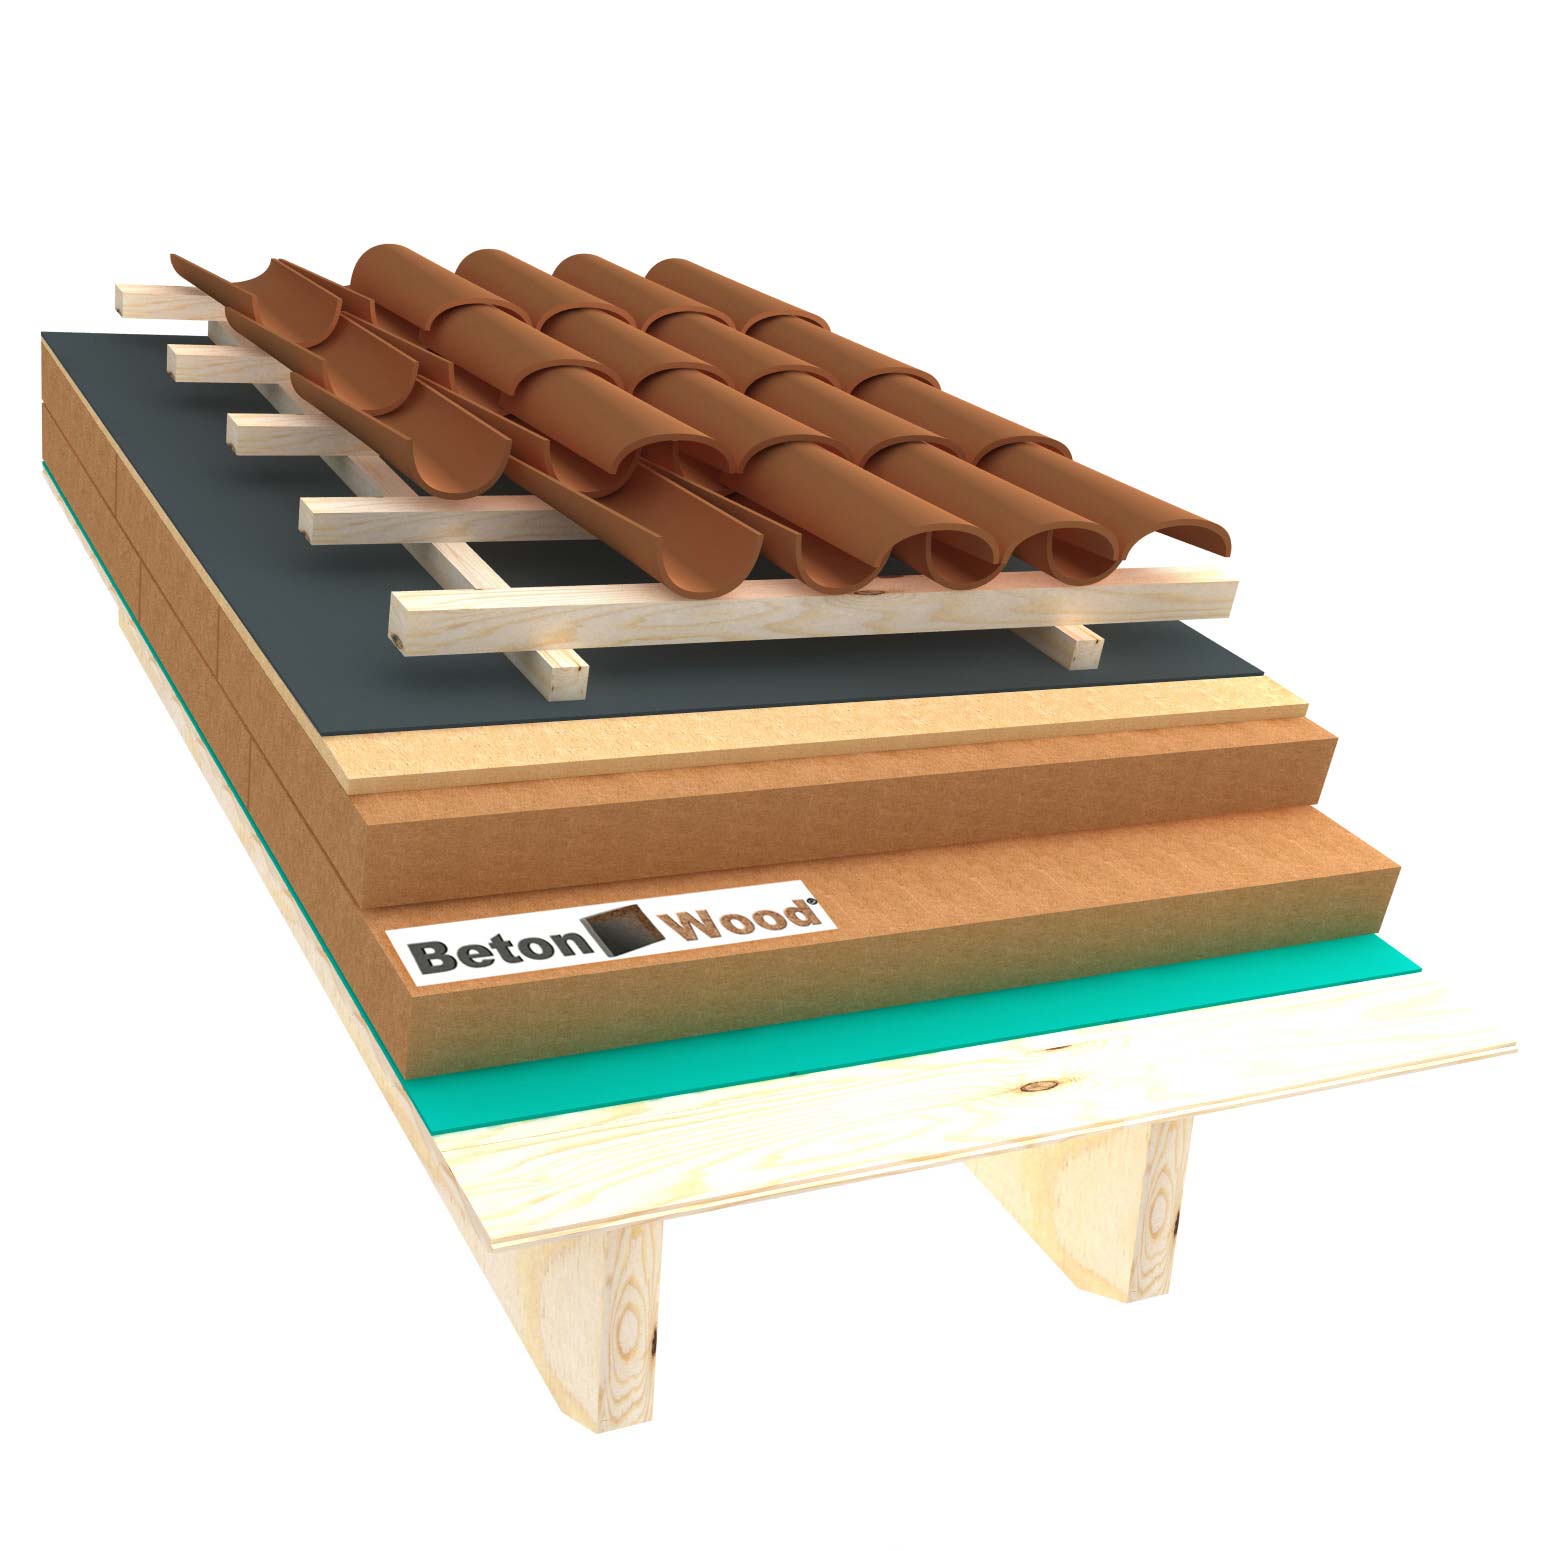 Ventilated roof with fiber wood Isorel and Universal dry on matchboarding